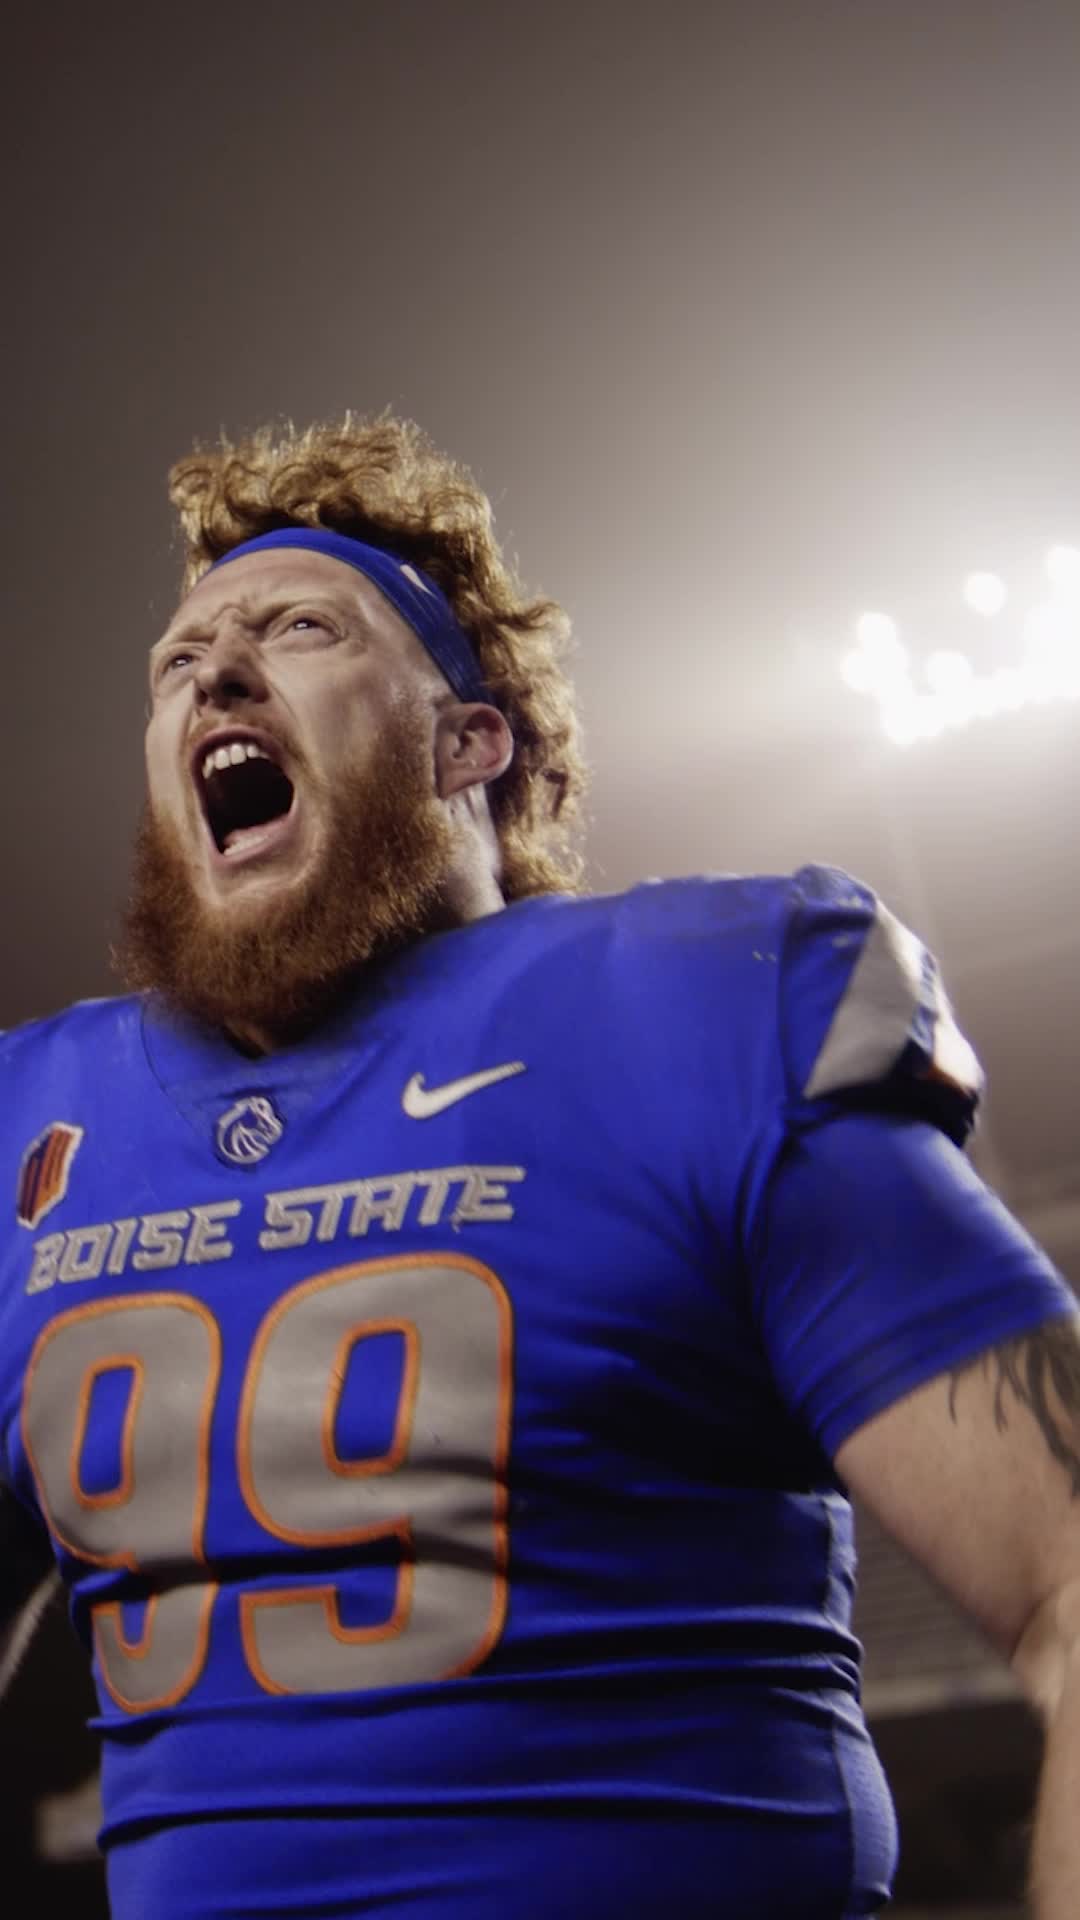 Scott Matlock, Boise State’s defensive tackle and social sciences major poising on the football field.